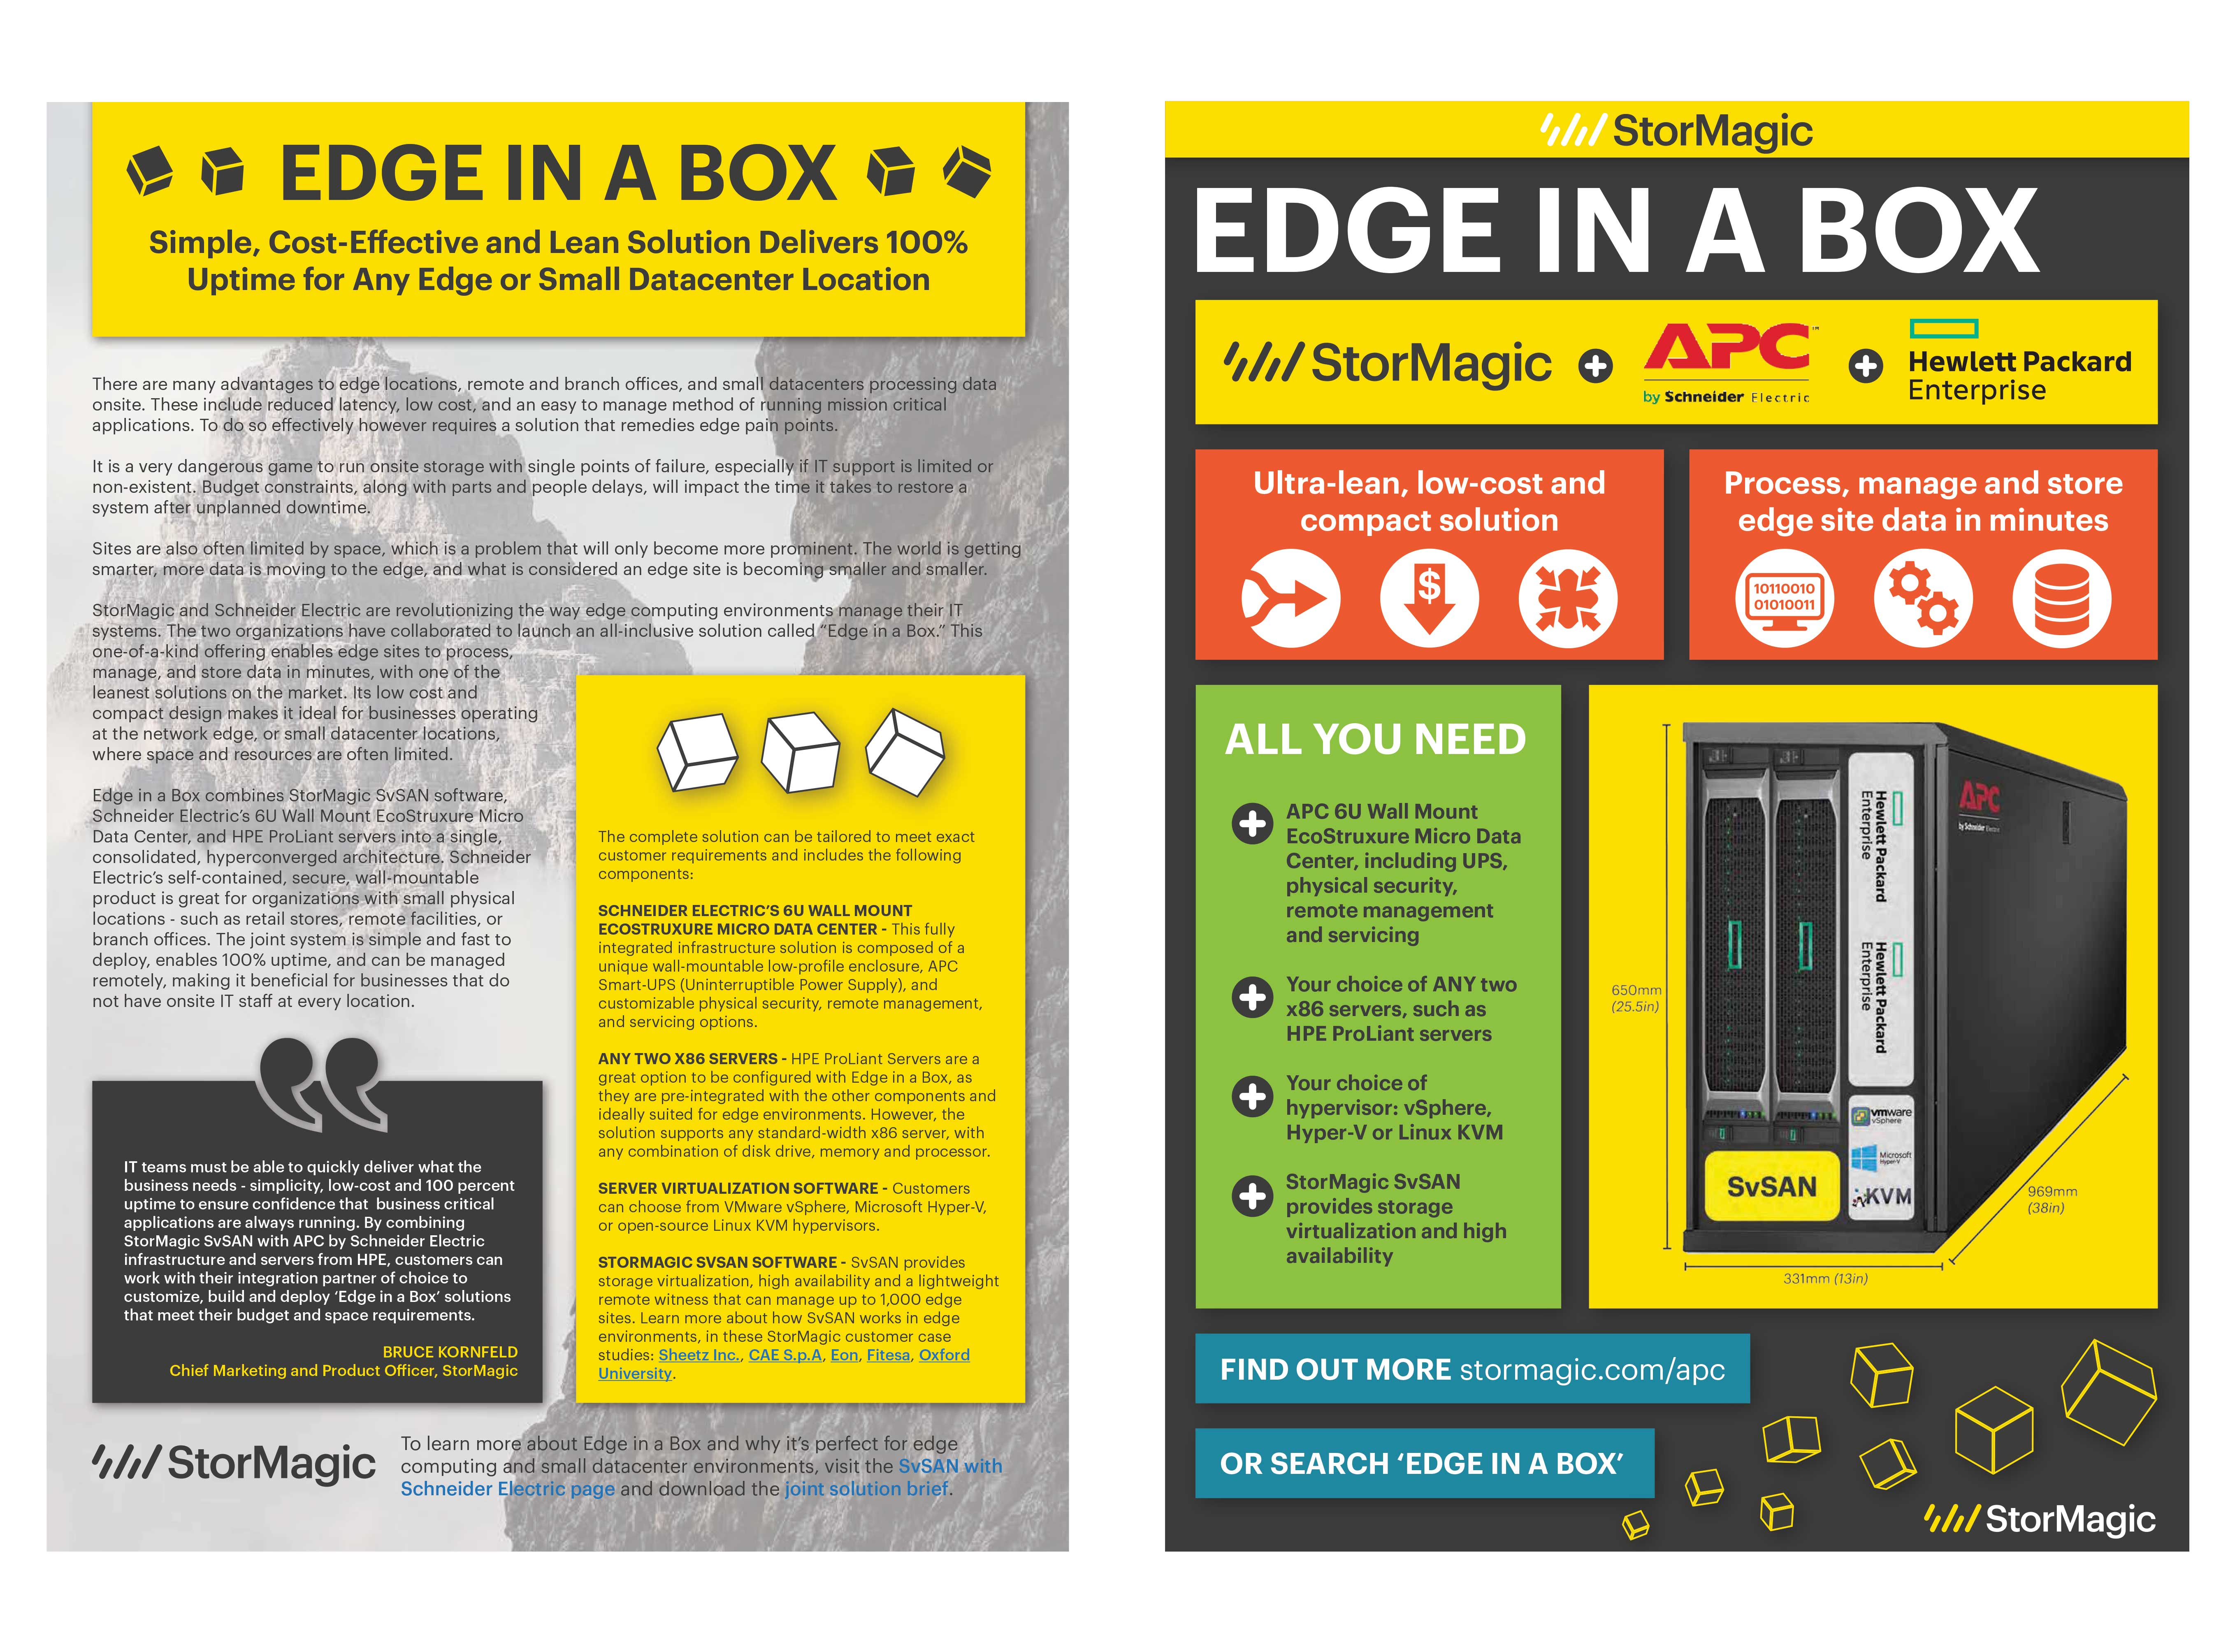 EDGE IN A BOX - Simple, Cost-E ective and Lean Solution Delivers 100%
Uptime for Any Edge or Small Datacenter Location